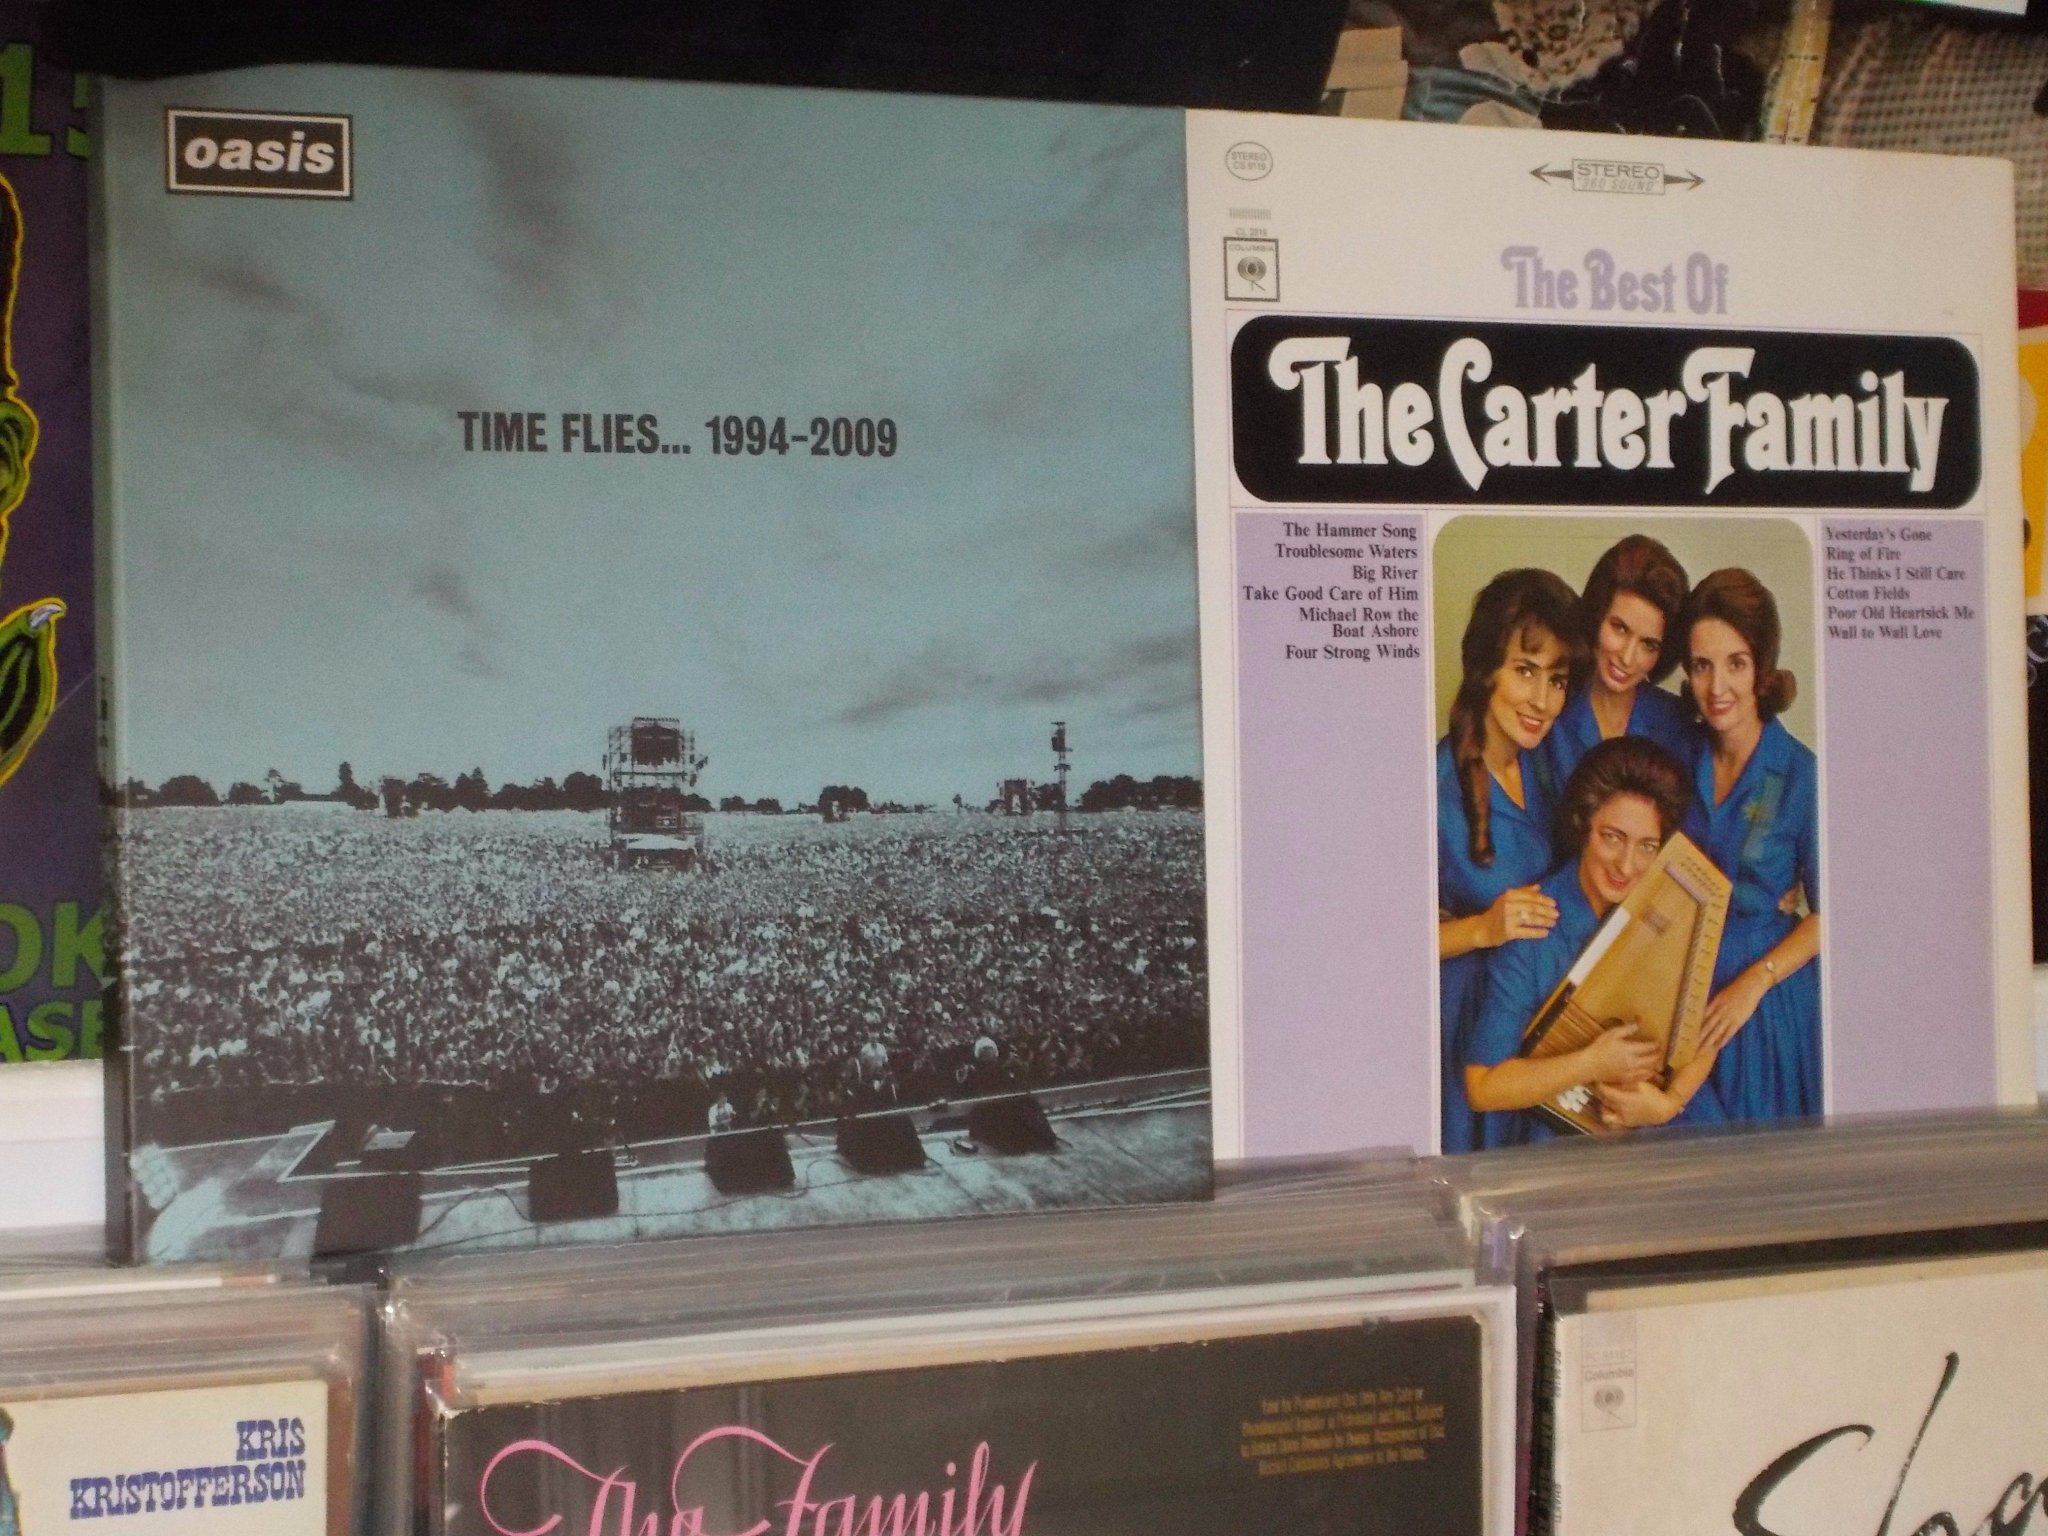 Happy Birthday to Paul Arthurs of Oasis & the late June Carter Cash 